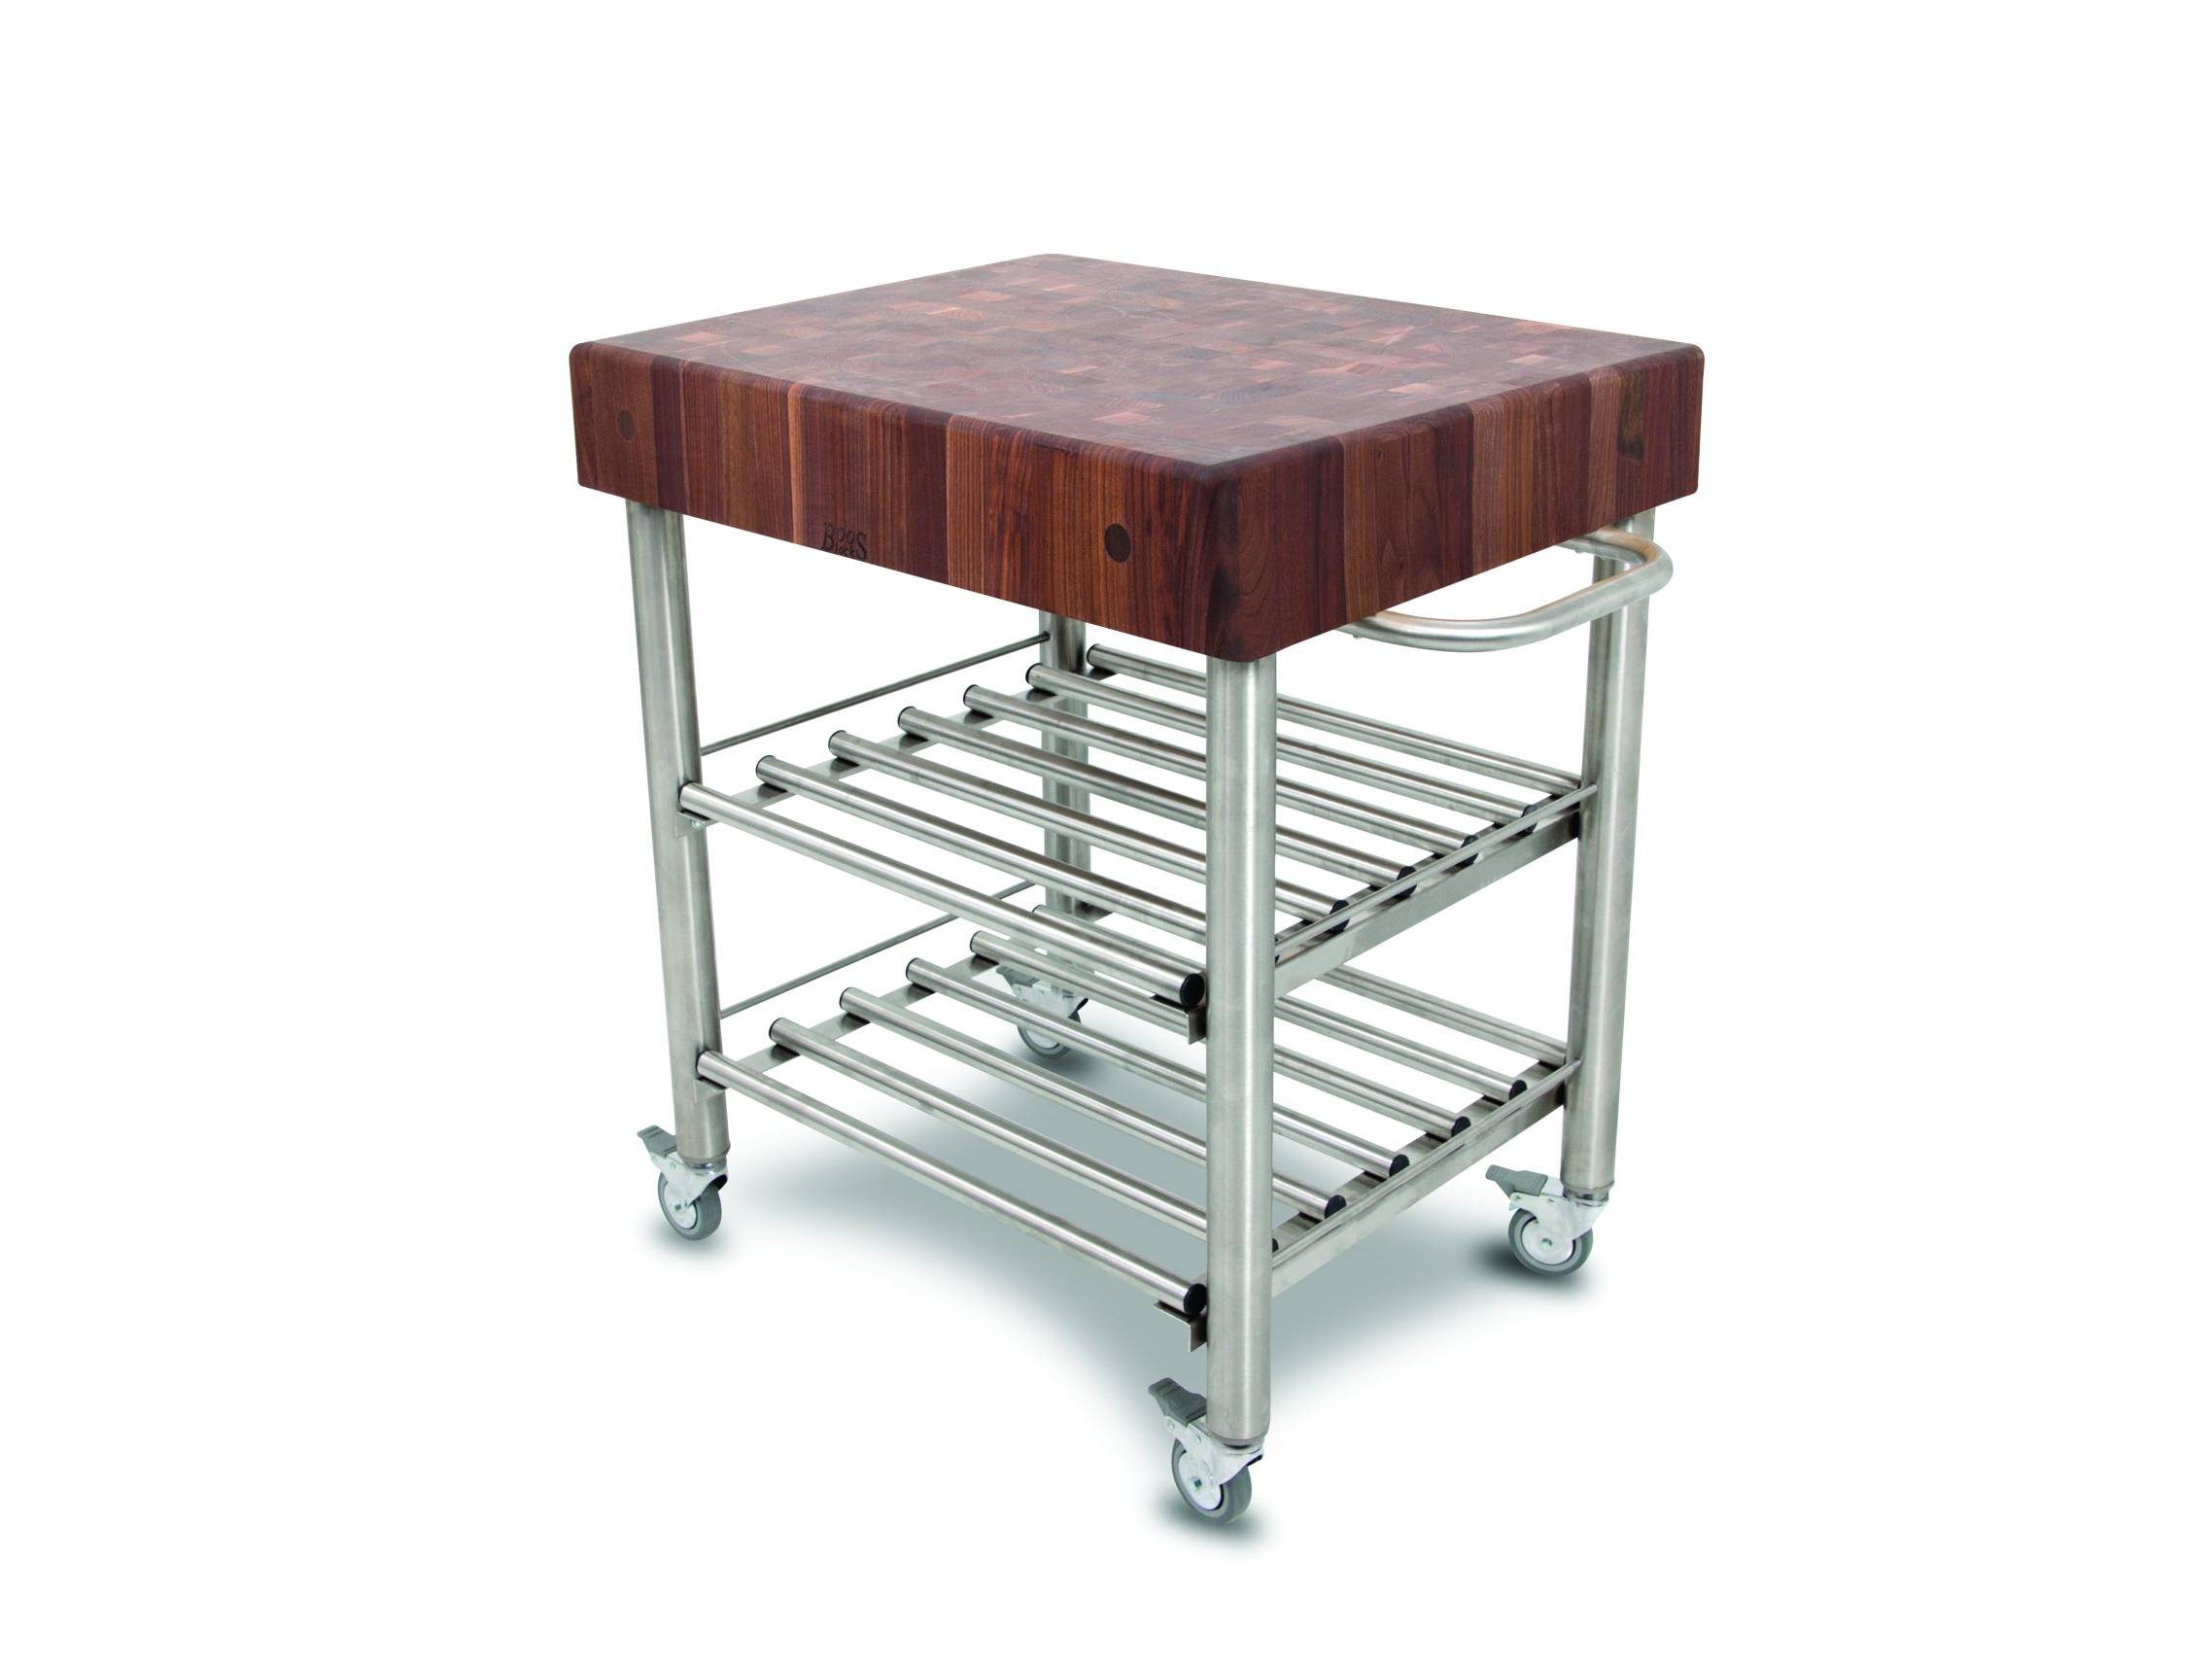 Cucina Kitchen &amp; Wine serving cart with Black Walnut end grain countertop and stainless steel base with 2 shelves, towel rack; lockable casters; 51